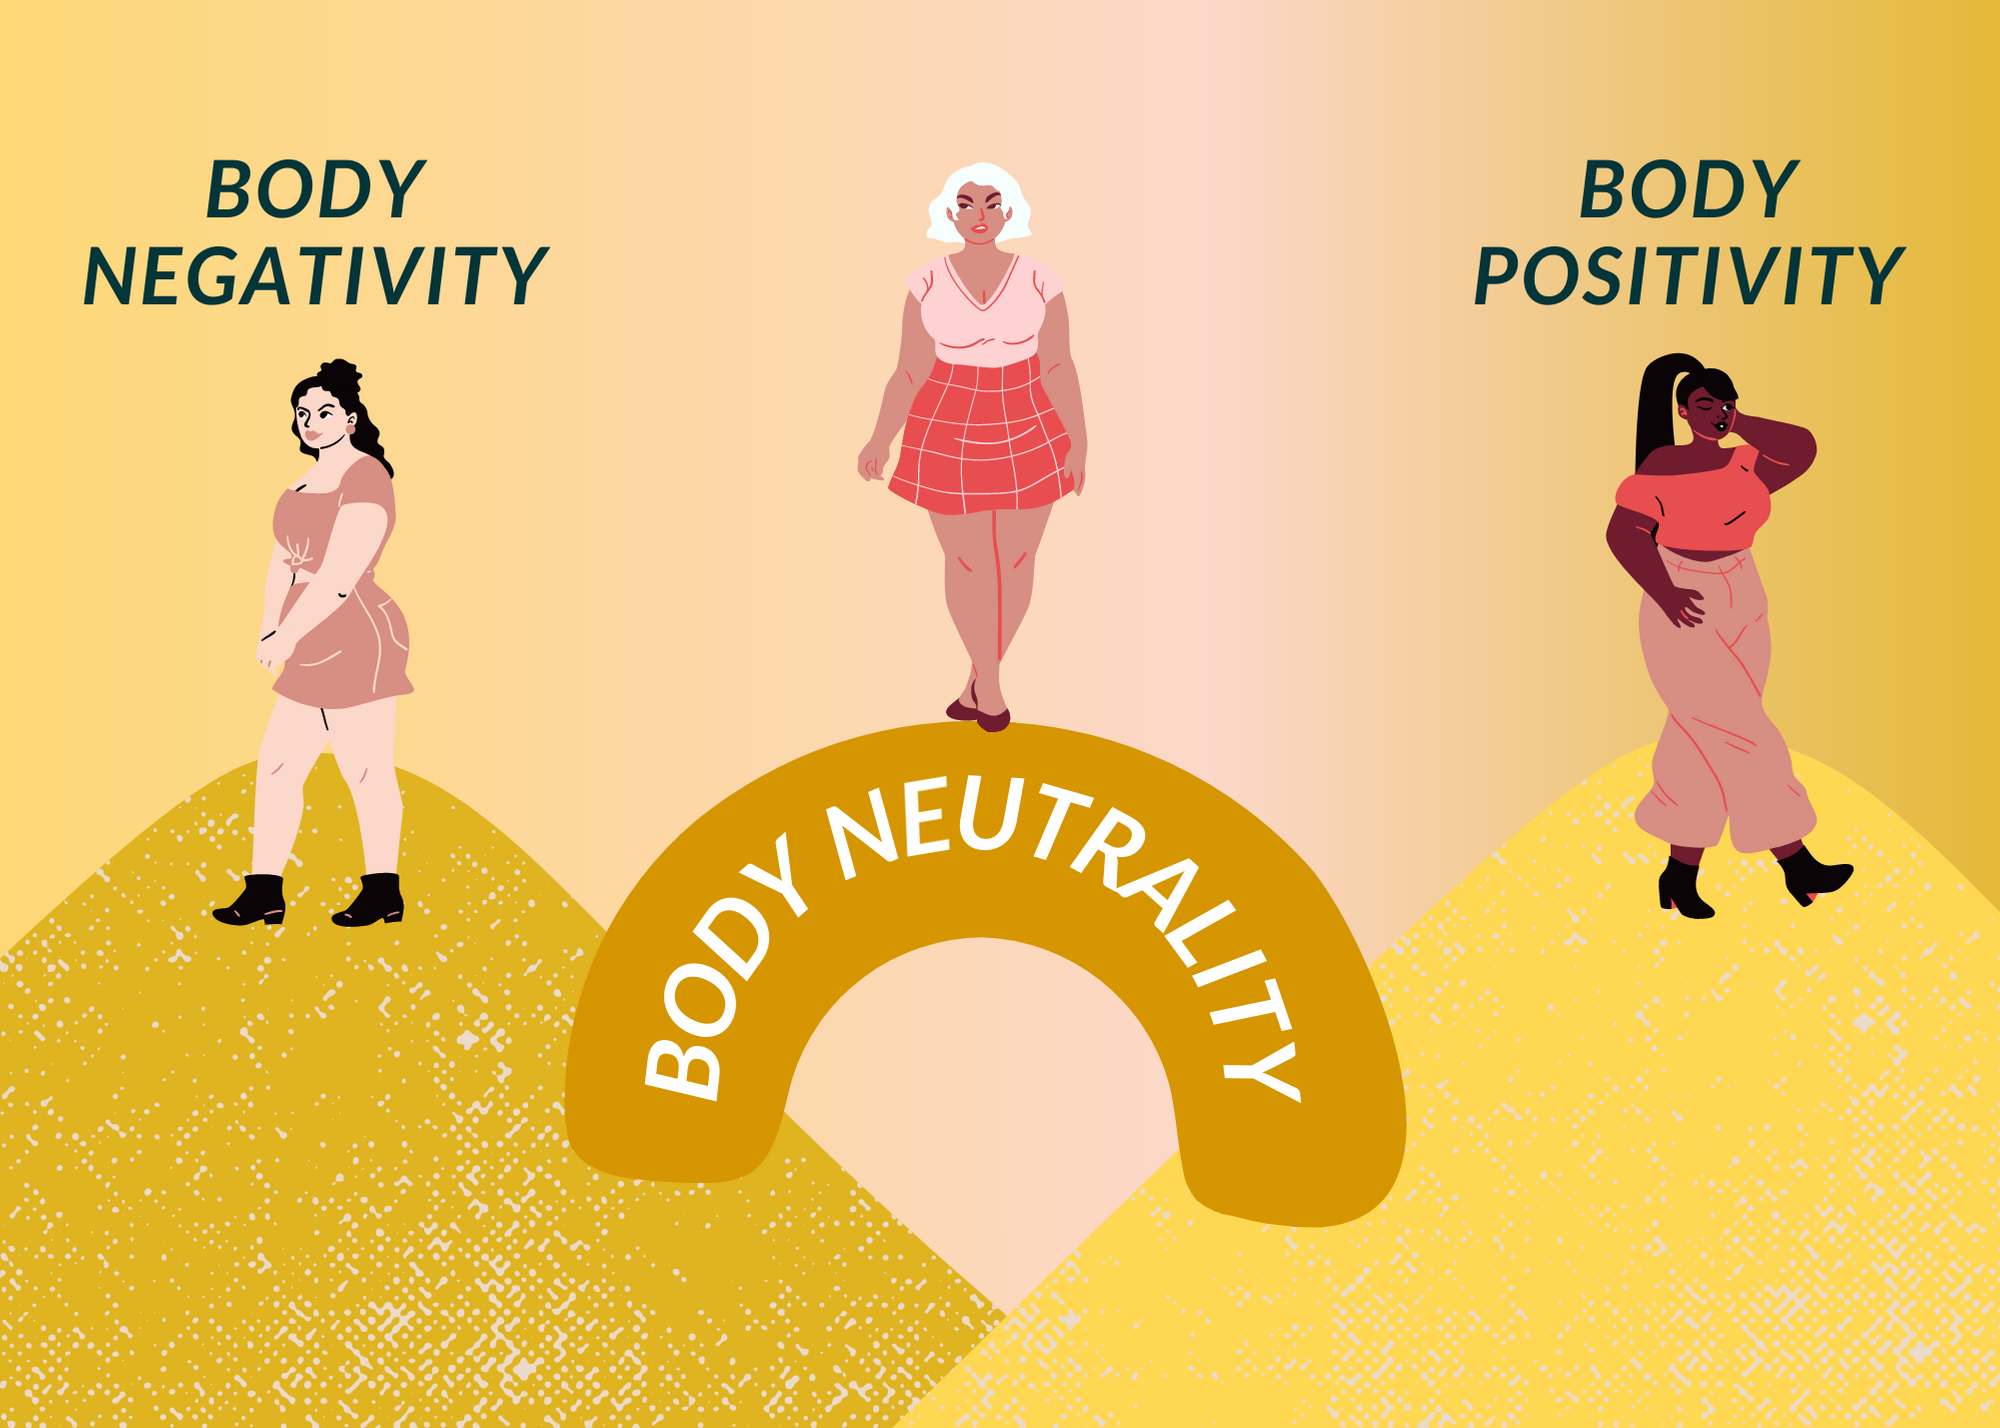 How to Practice Body Neutrality: 17 Examples, Exercises, More